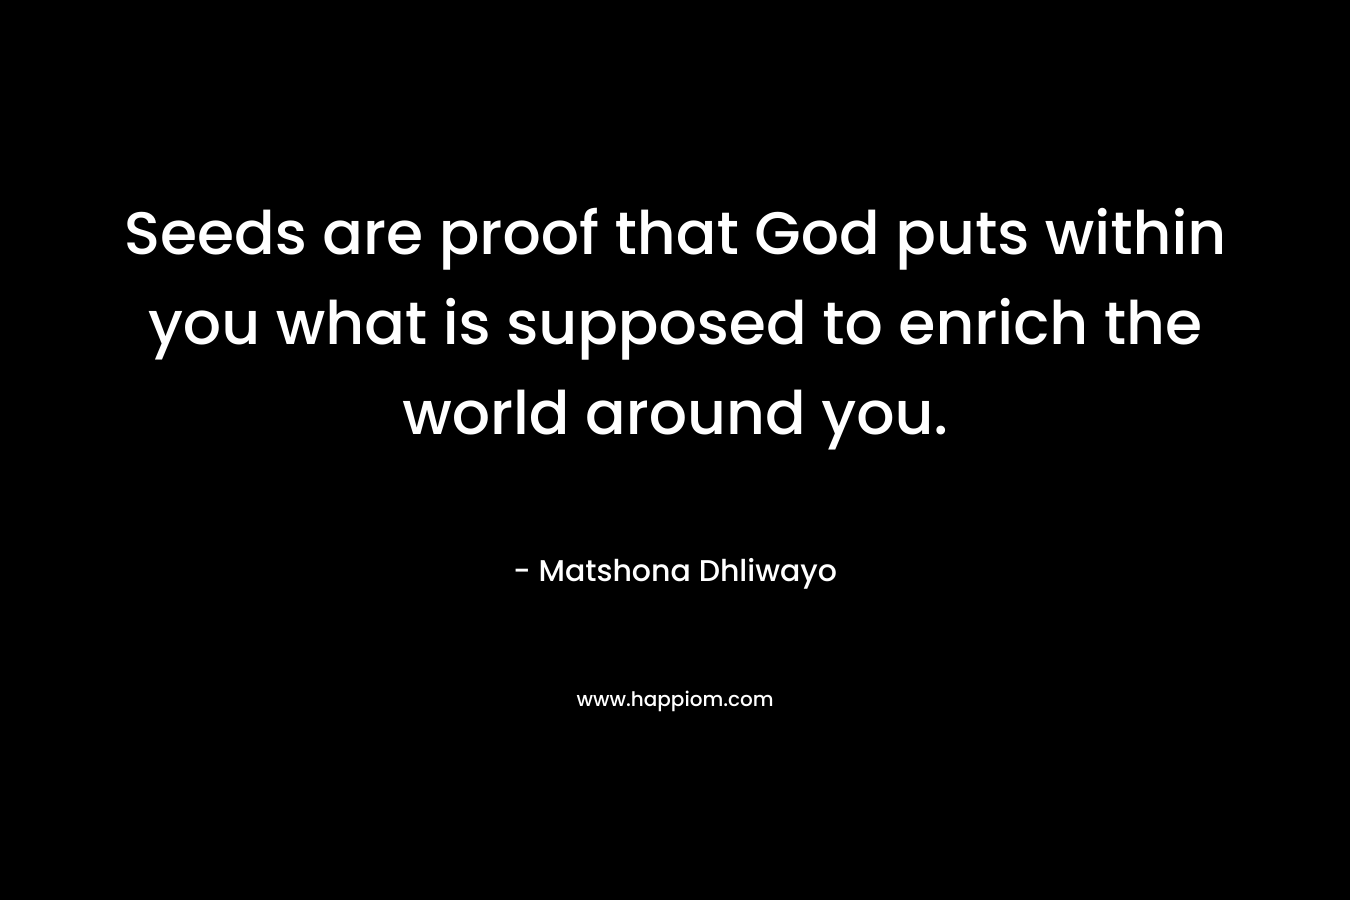 Seeds are proof that God puts within you what is supposed to enrich the world around you. – Matshona Dhliwayo